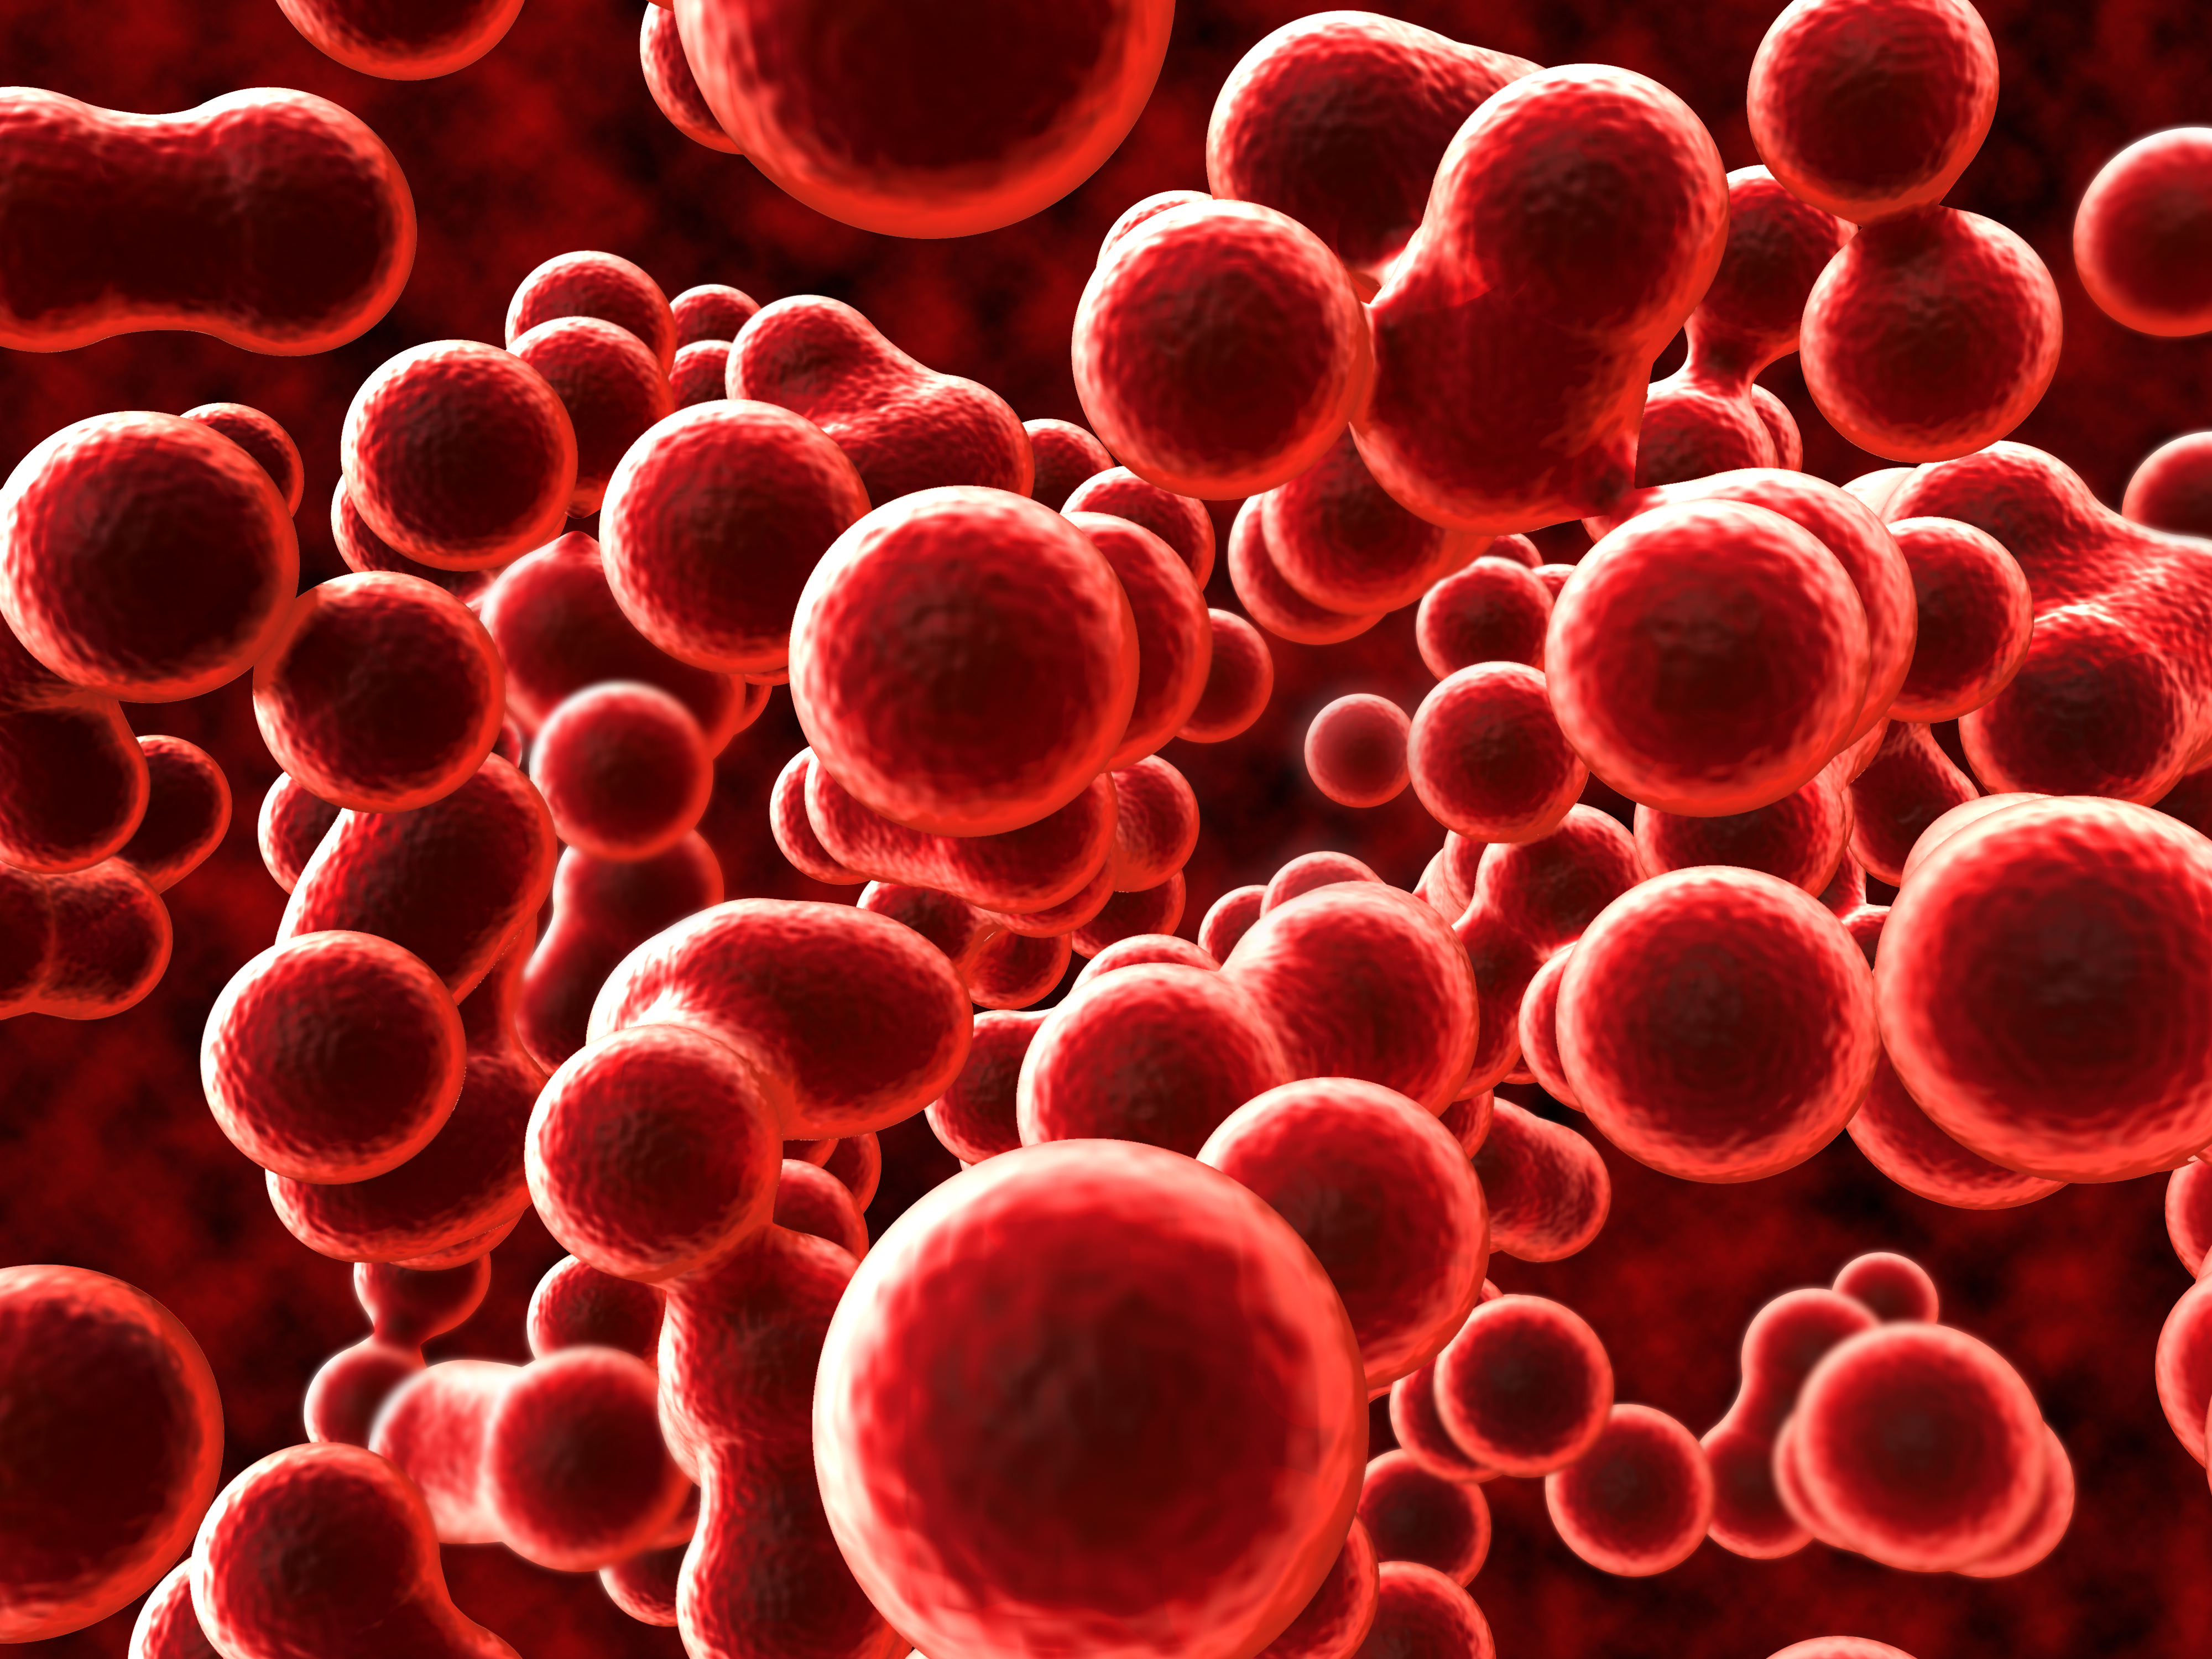 Avoiding Anemia - Boost Your Red Blood Cells - AMAC - The ...